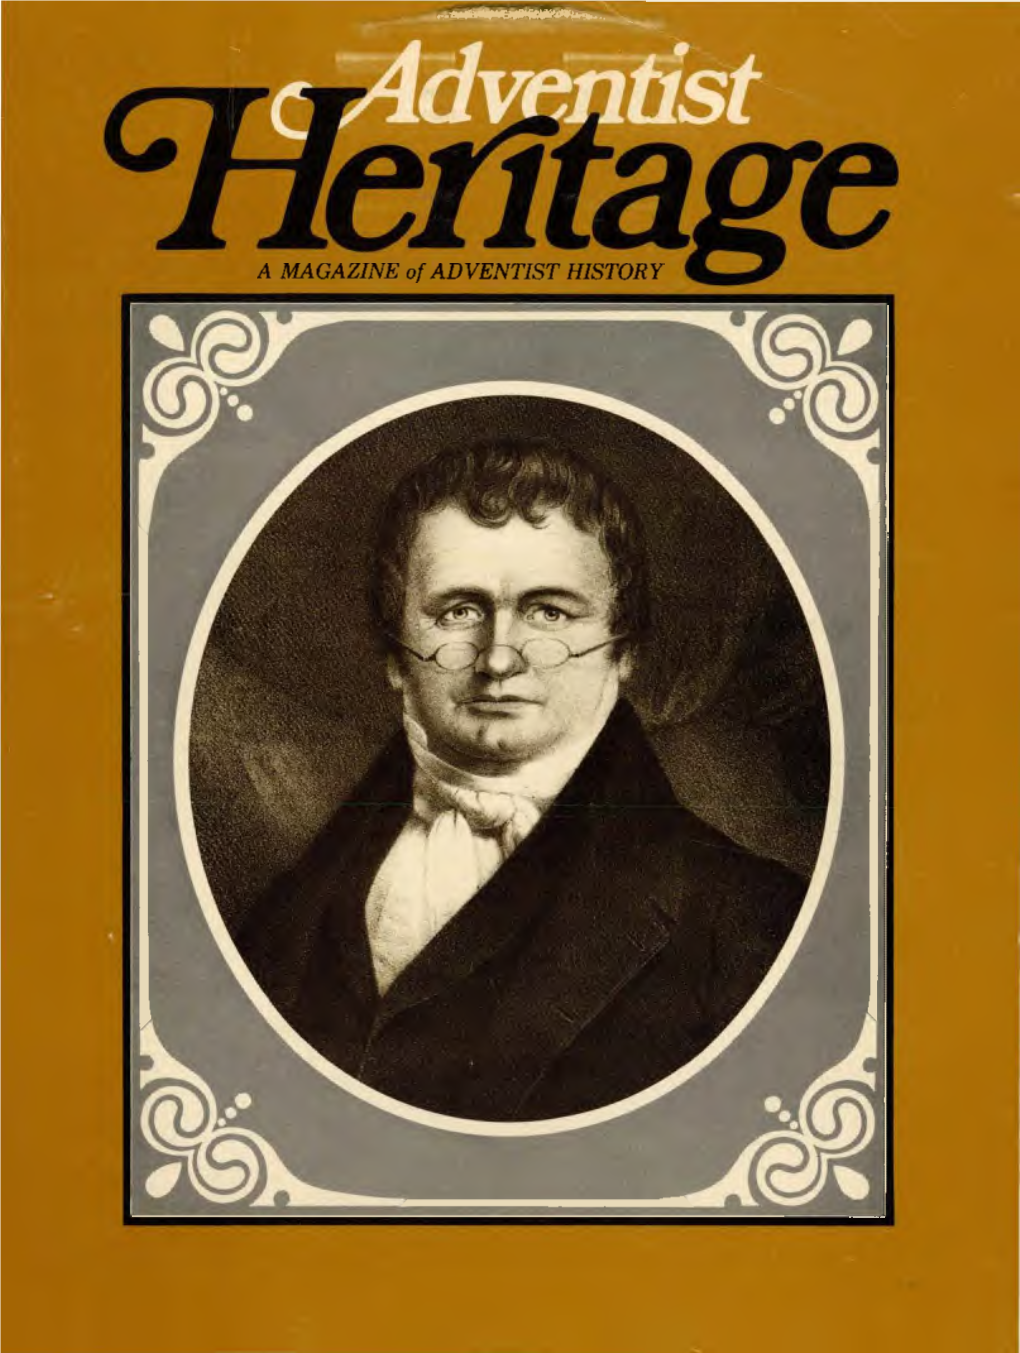 A MAGAZINE of ADVENTIST HISTORY COVER PHOTO: William Miller, Leading Preacher of the Advent Movement in the 1830'S and 1840'S